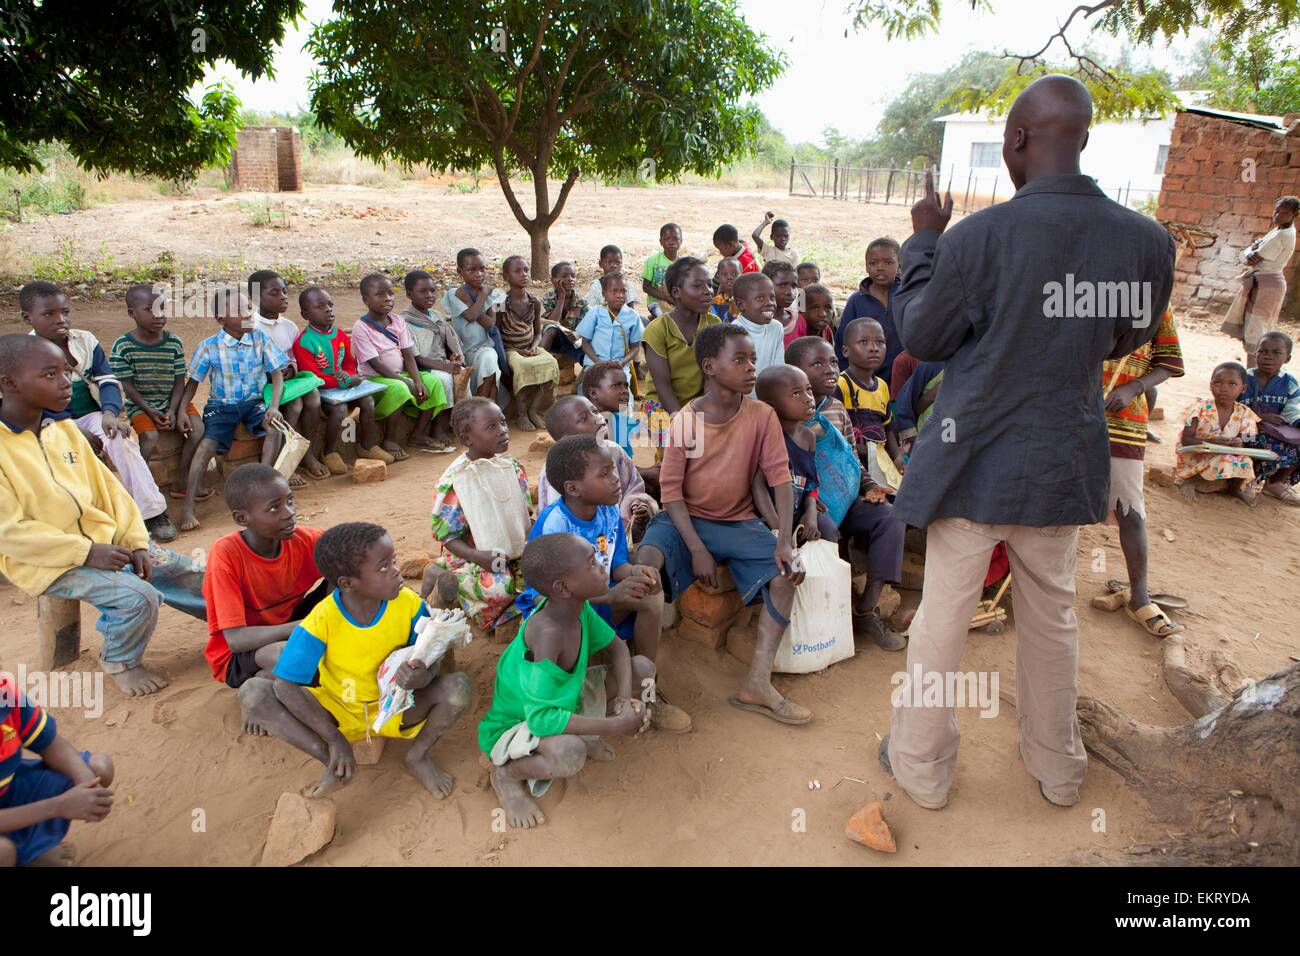 An Outdoor School Classroom With A Male Teacher; Manica, Mozambique, Africa Stock Photo